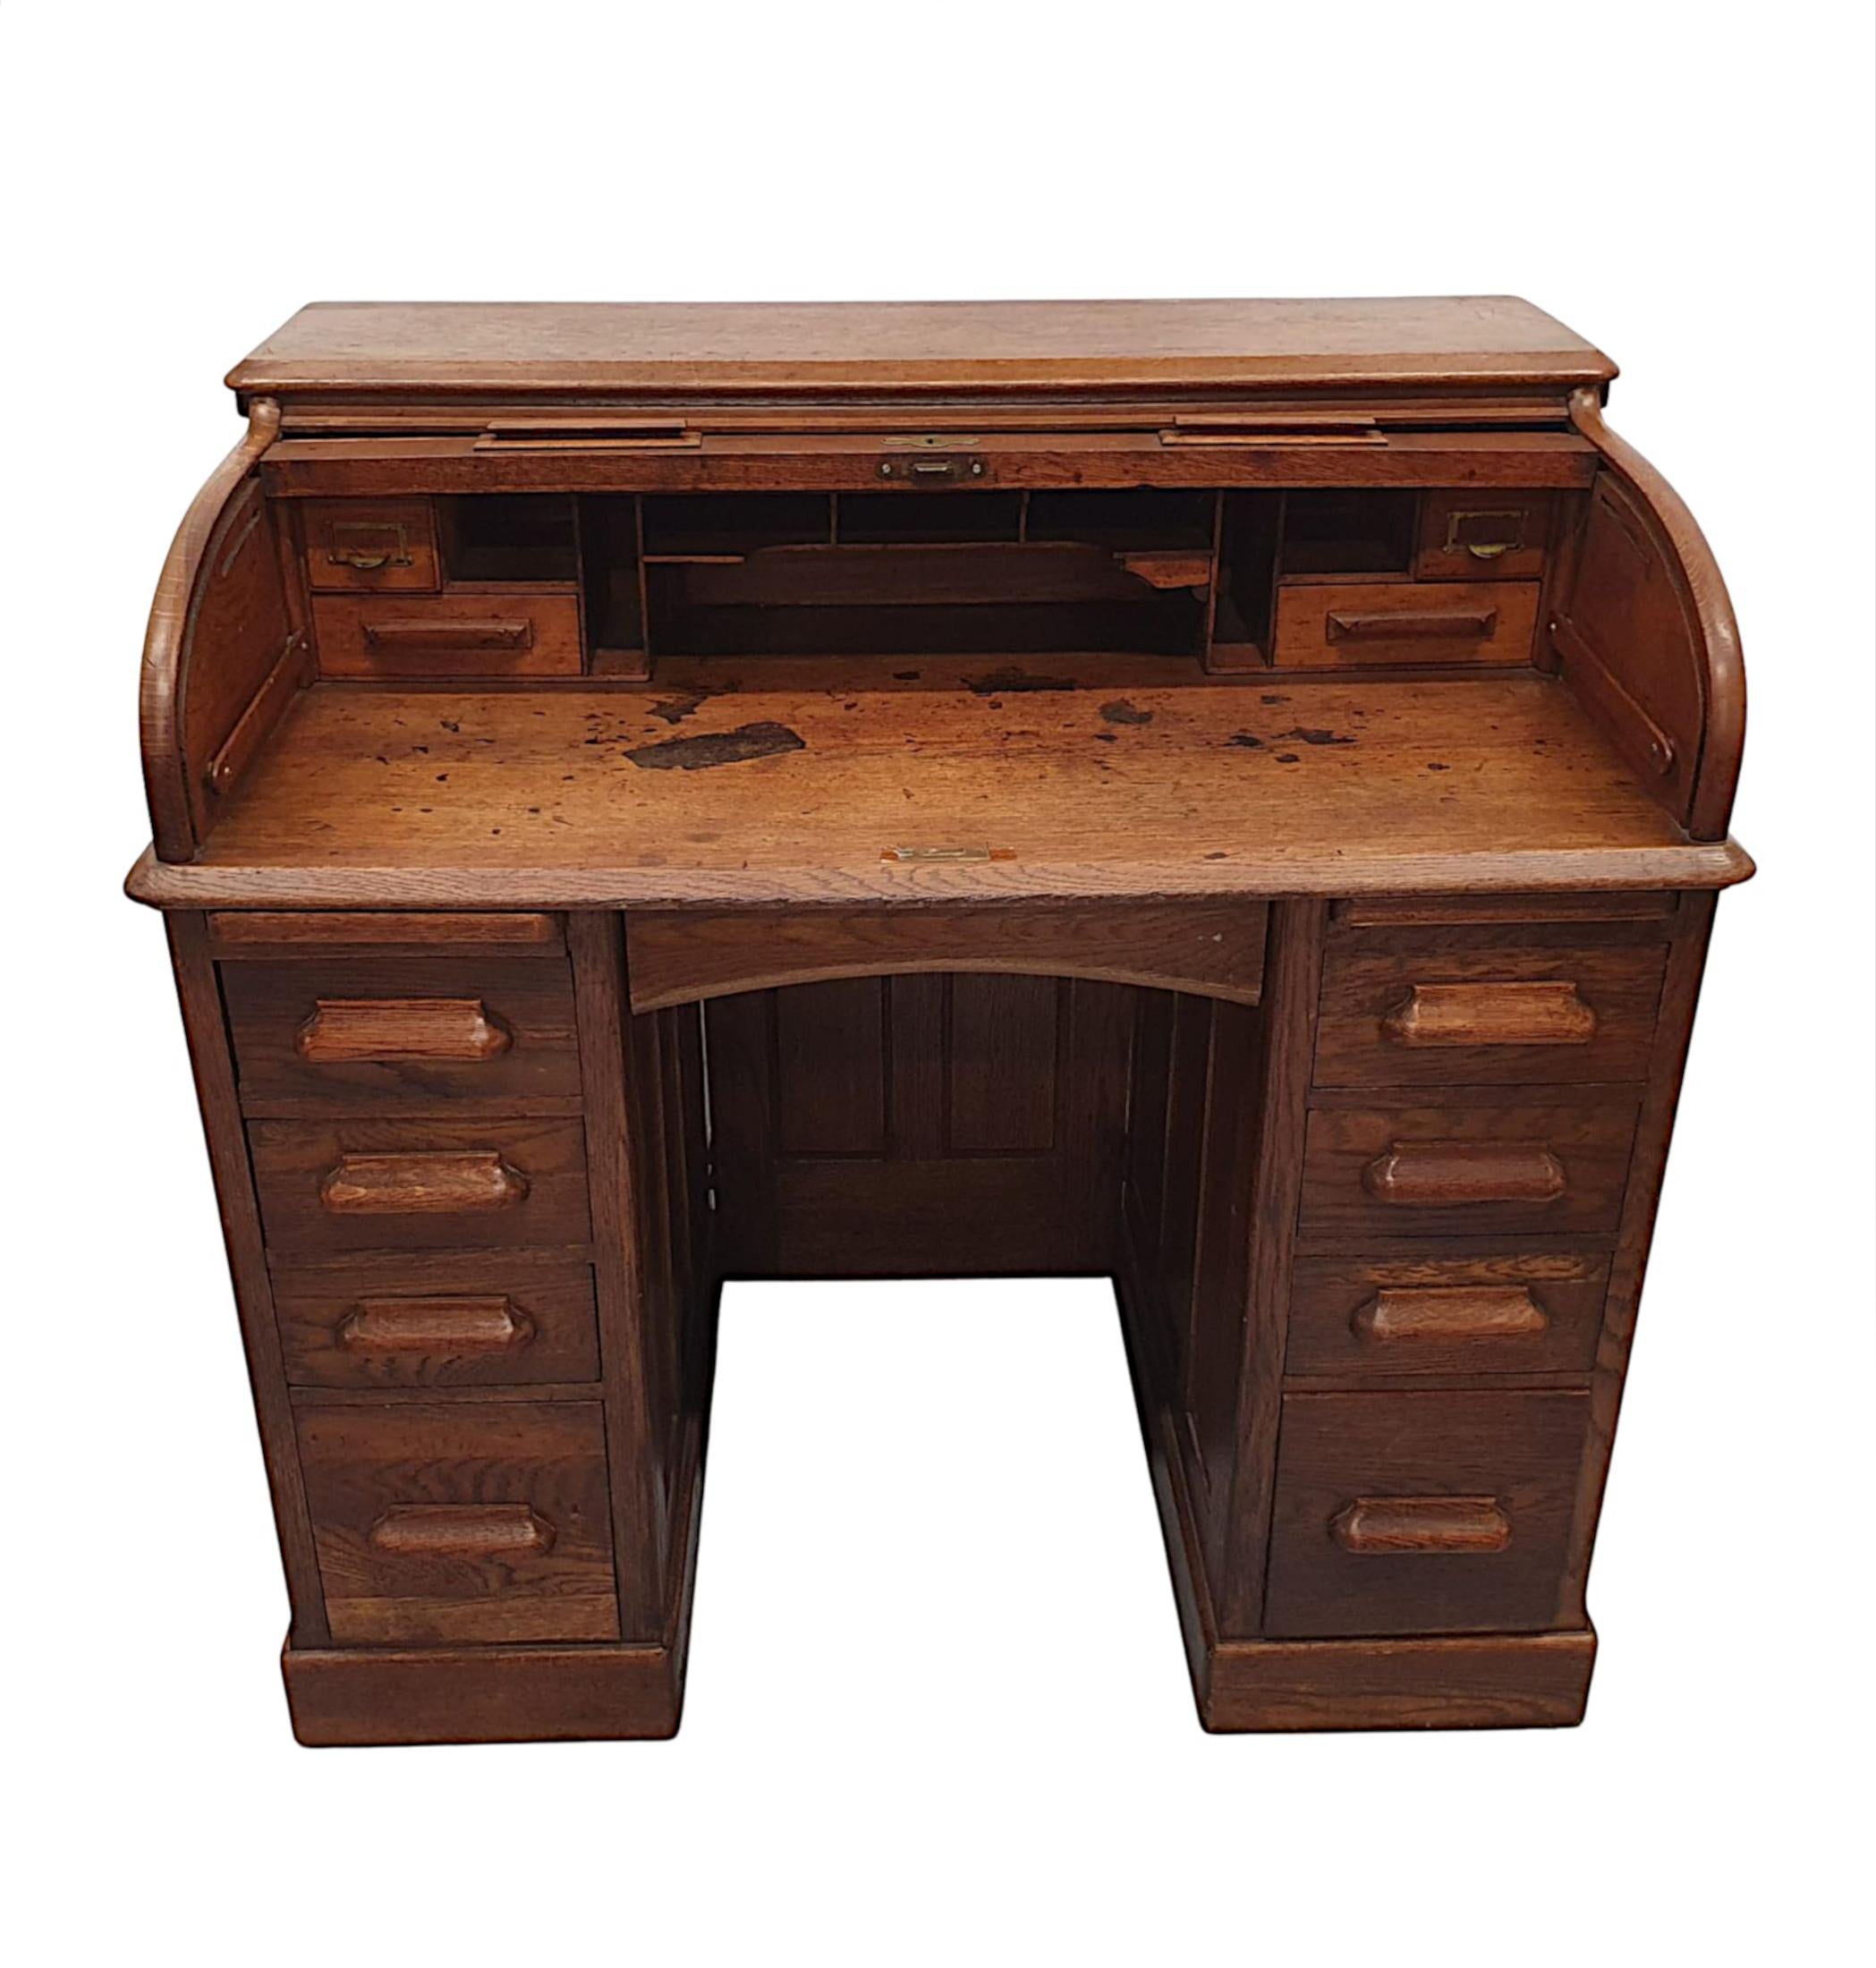 A superb 1920s beautifully patinated oak roll top desk of neat proportions, finely carved and of gorgeous quality. The moulded top of rectangular form raised over D-shaped tambour slatted front with decorative brass escutcheon and moulded pulls. The